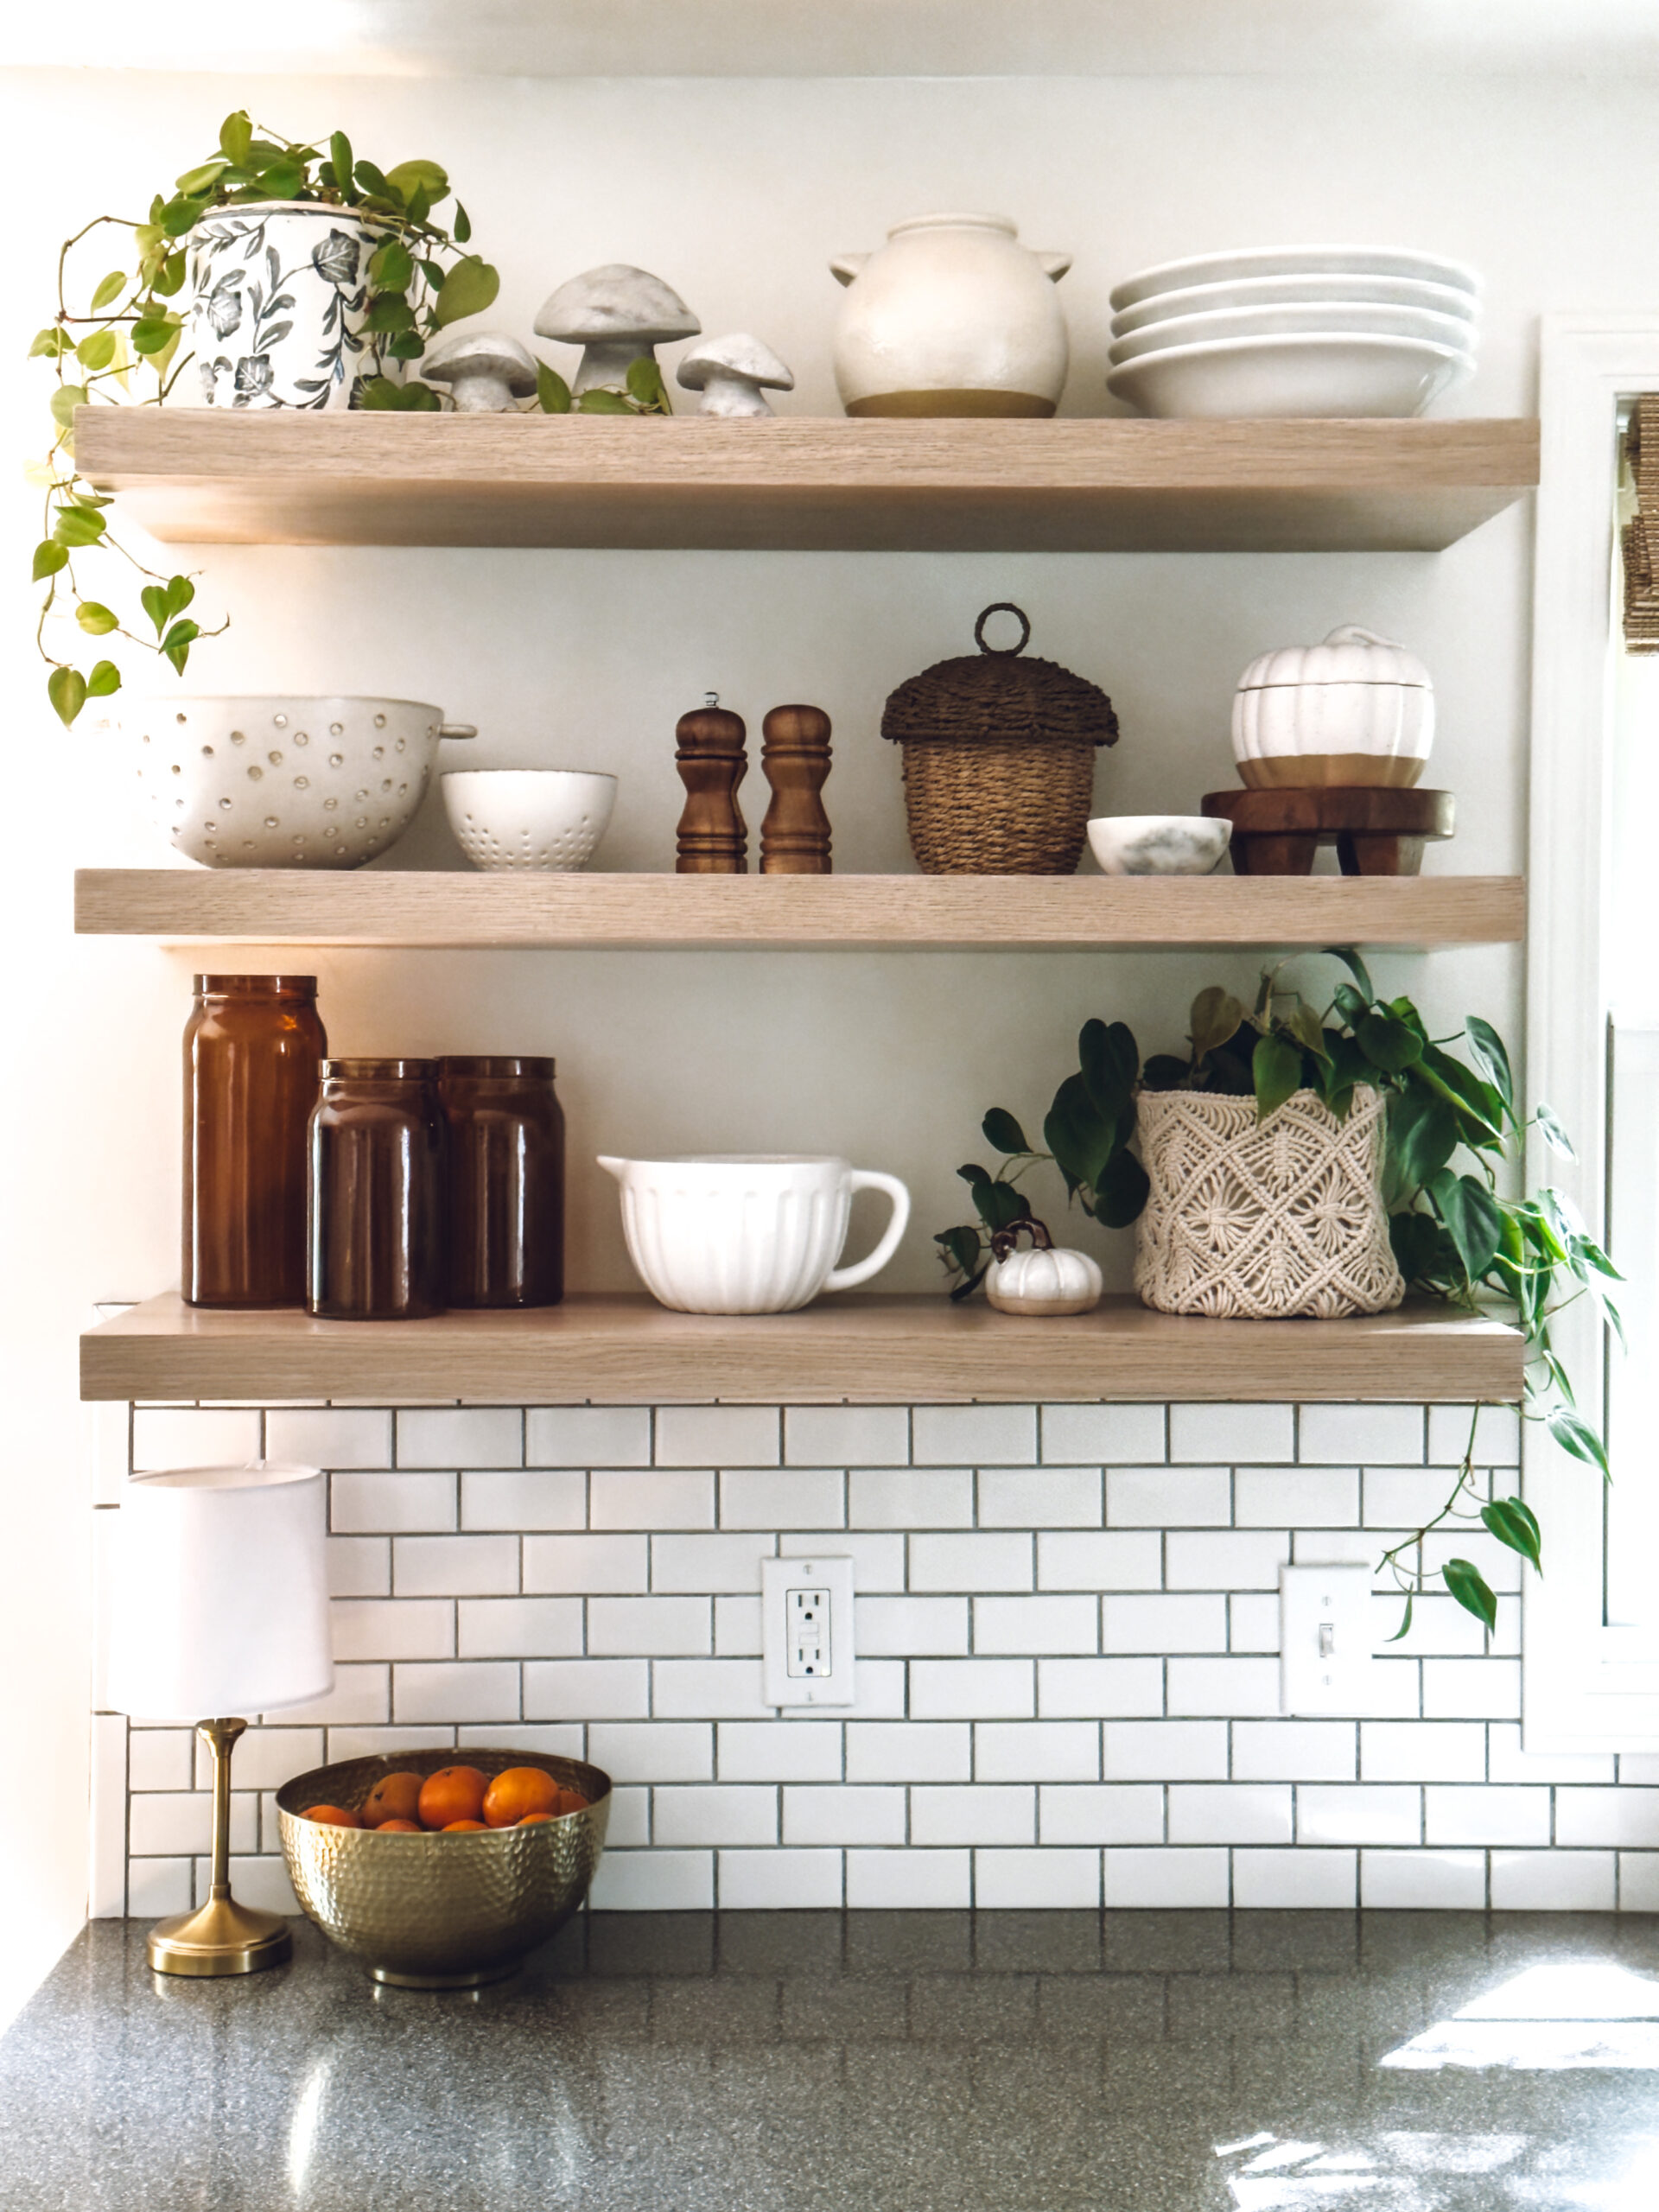 mushrooms, an acorn basket, pumpkin canister and amber glass jars on the kitchen shelves for simple fall decor ideas for the home